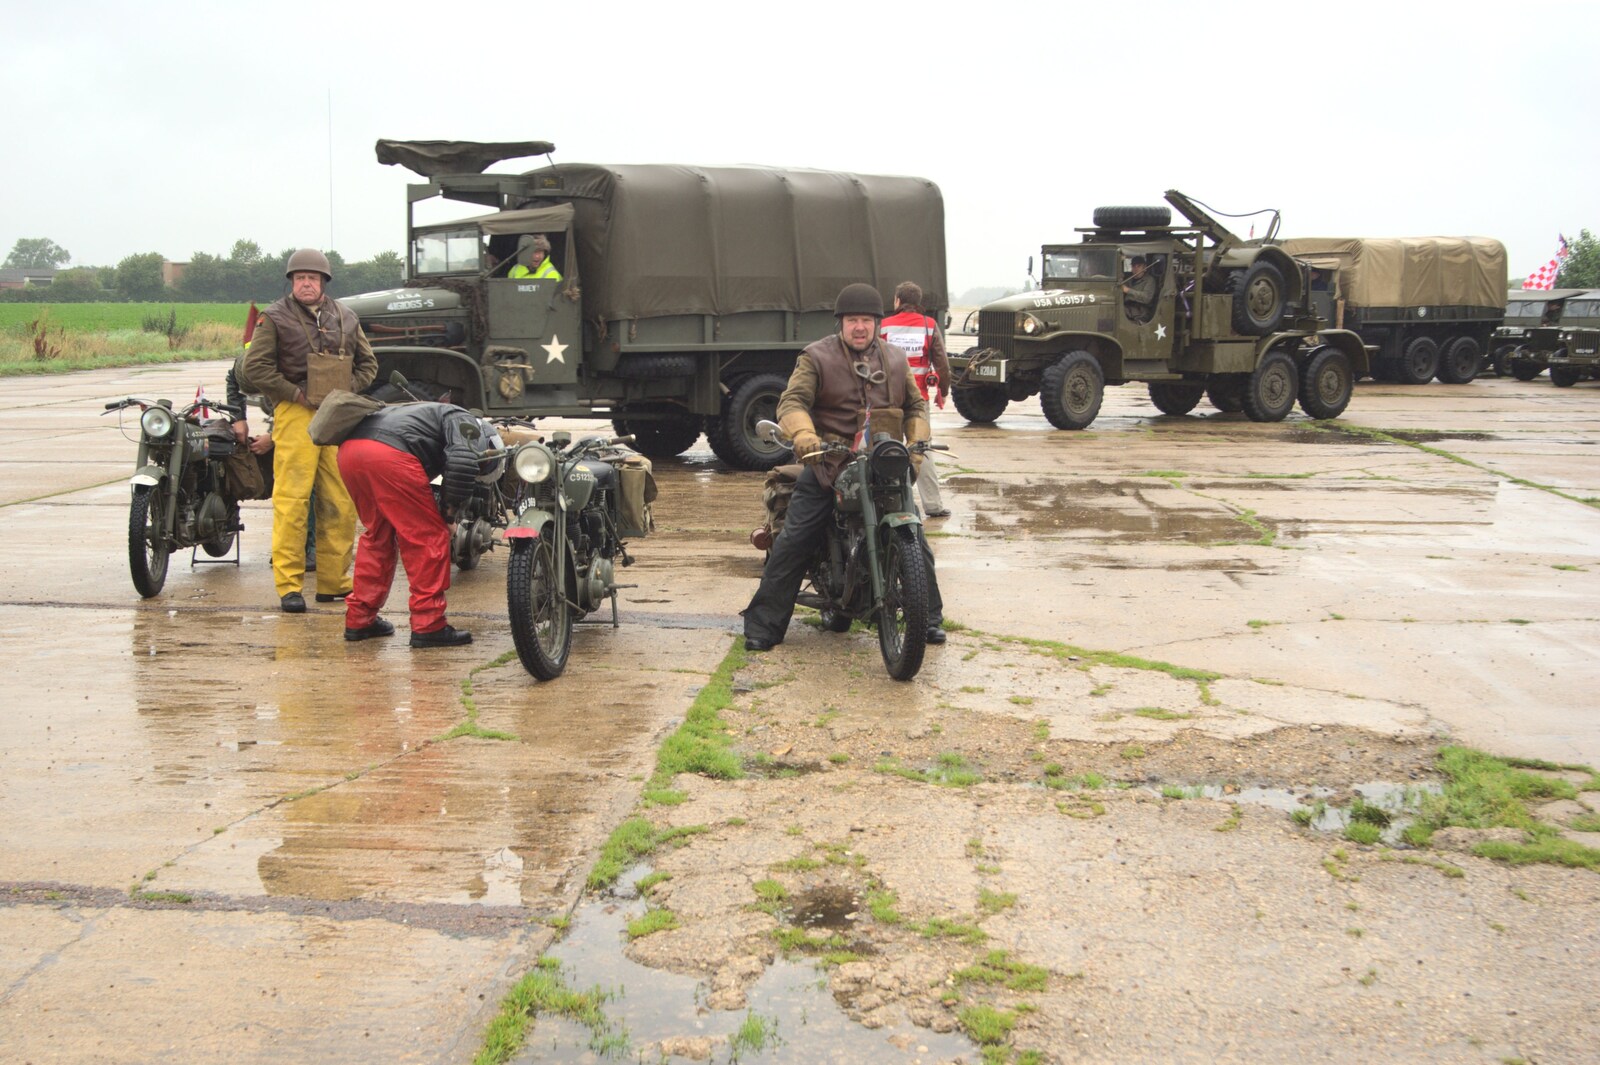 The motorobike massive get ready to steam off from Clive's Military Vehicle Convoy, Brome Aerodrome, Suffolk - 16th July 2011